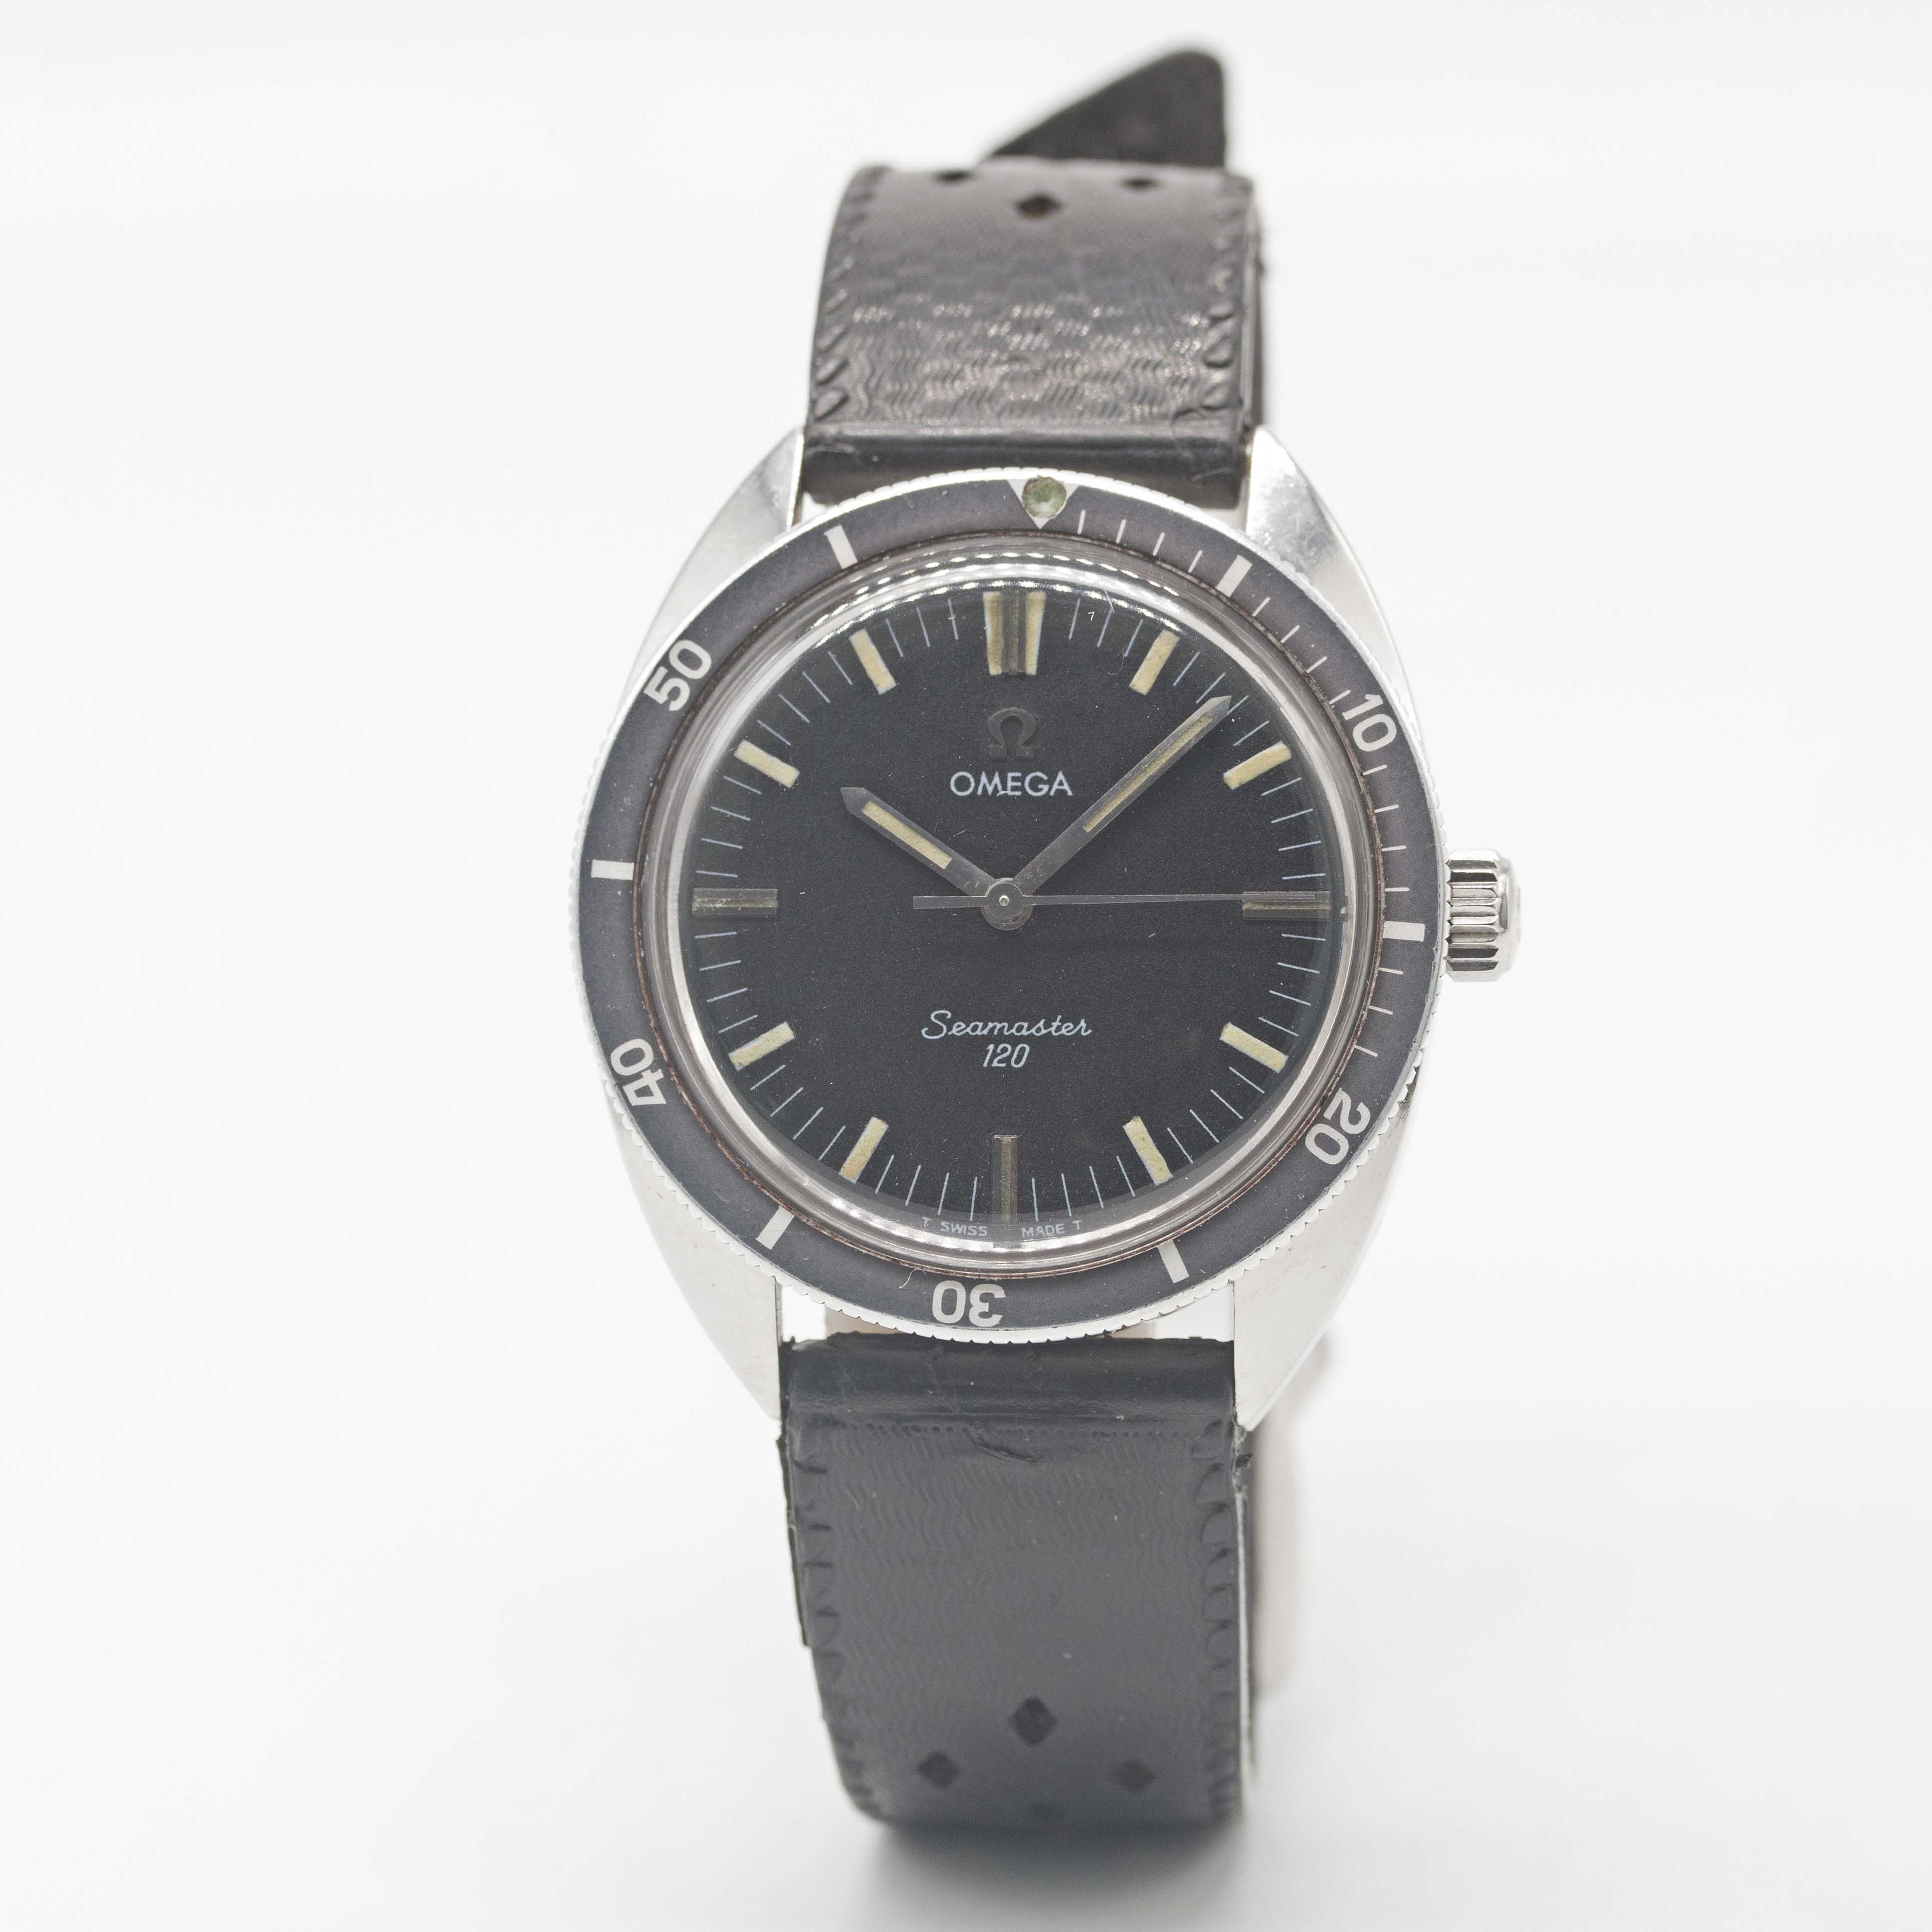 A GENTLEMAN'S STAINLESS STEEL OMEGA SEAMASTER 120 DIVERS WRIST WATCH CIRCA 1967, REF. 135.027 - Image 2 of 6